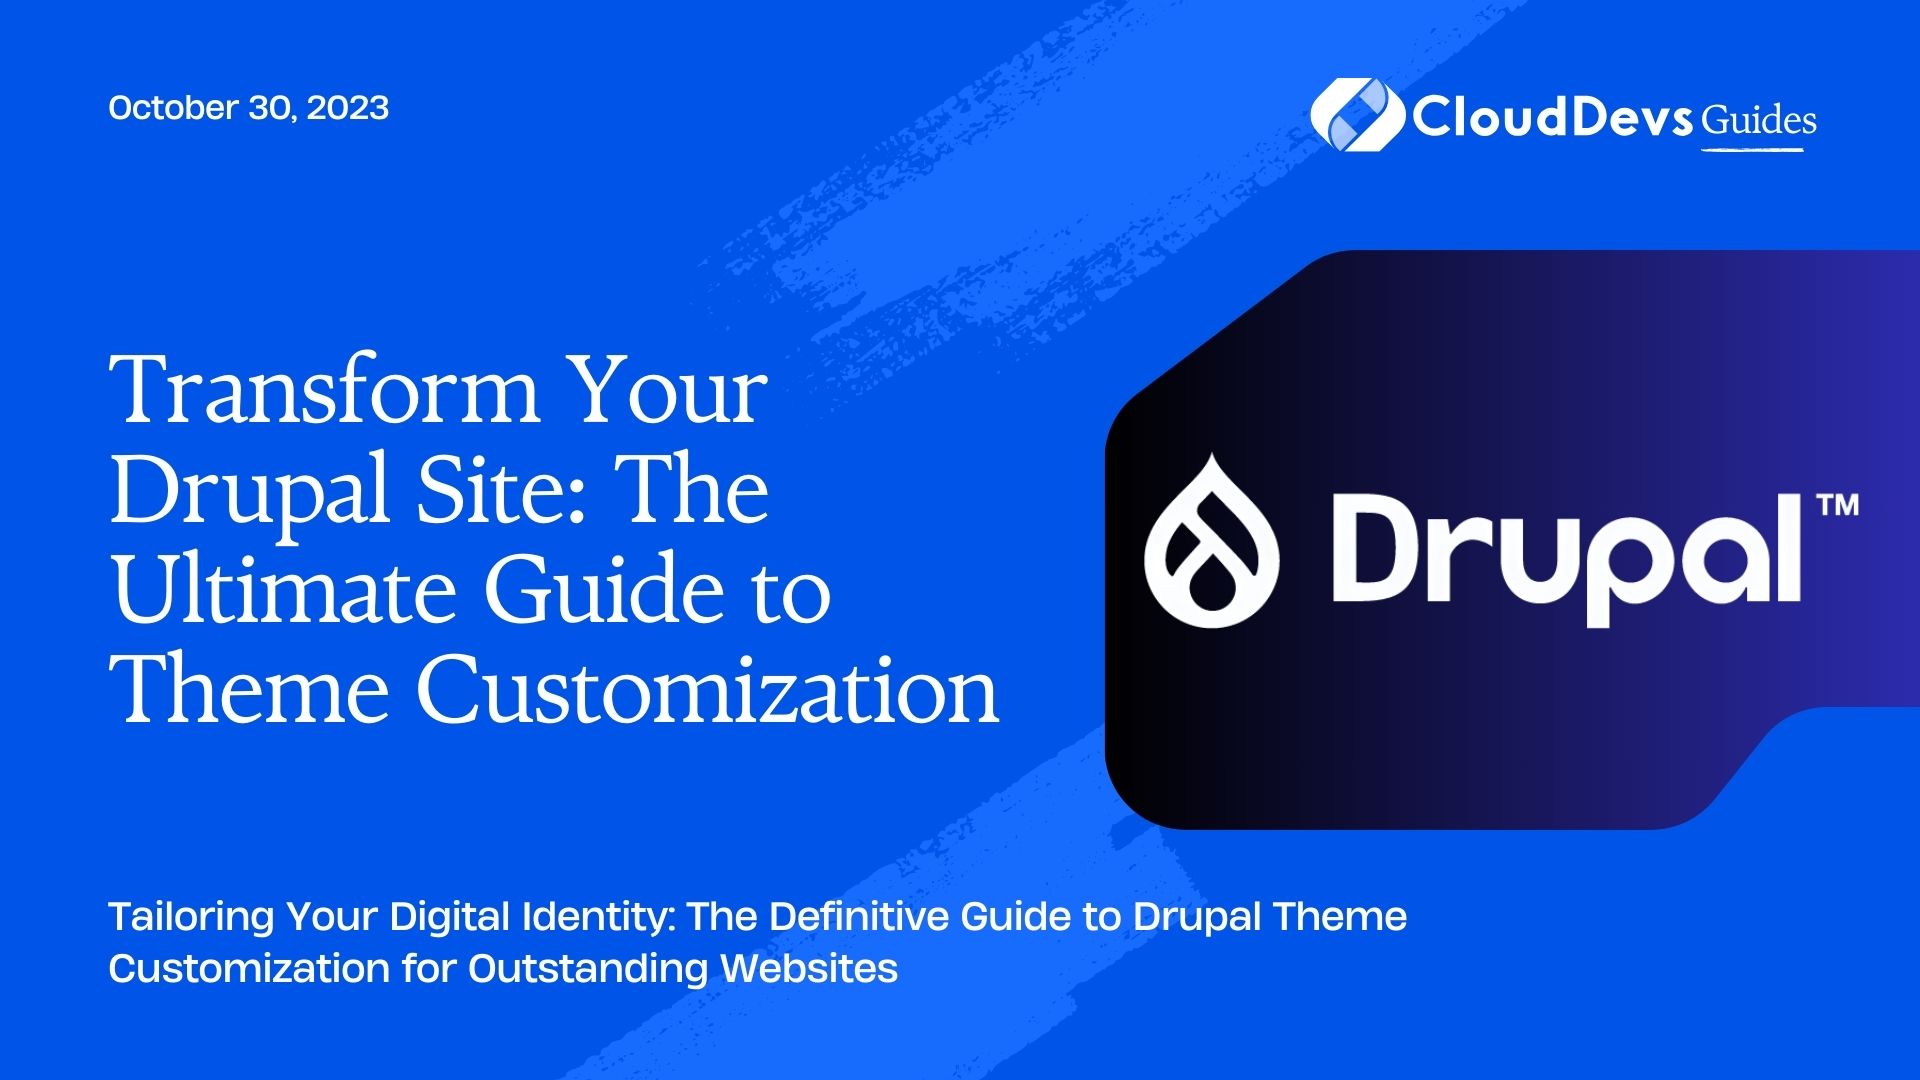 Transform Your Drupal Site: The Ultimate Guide to Theme Customization